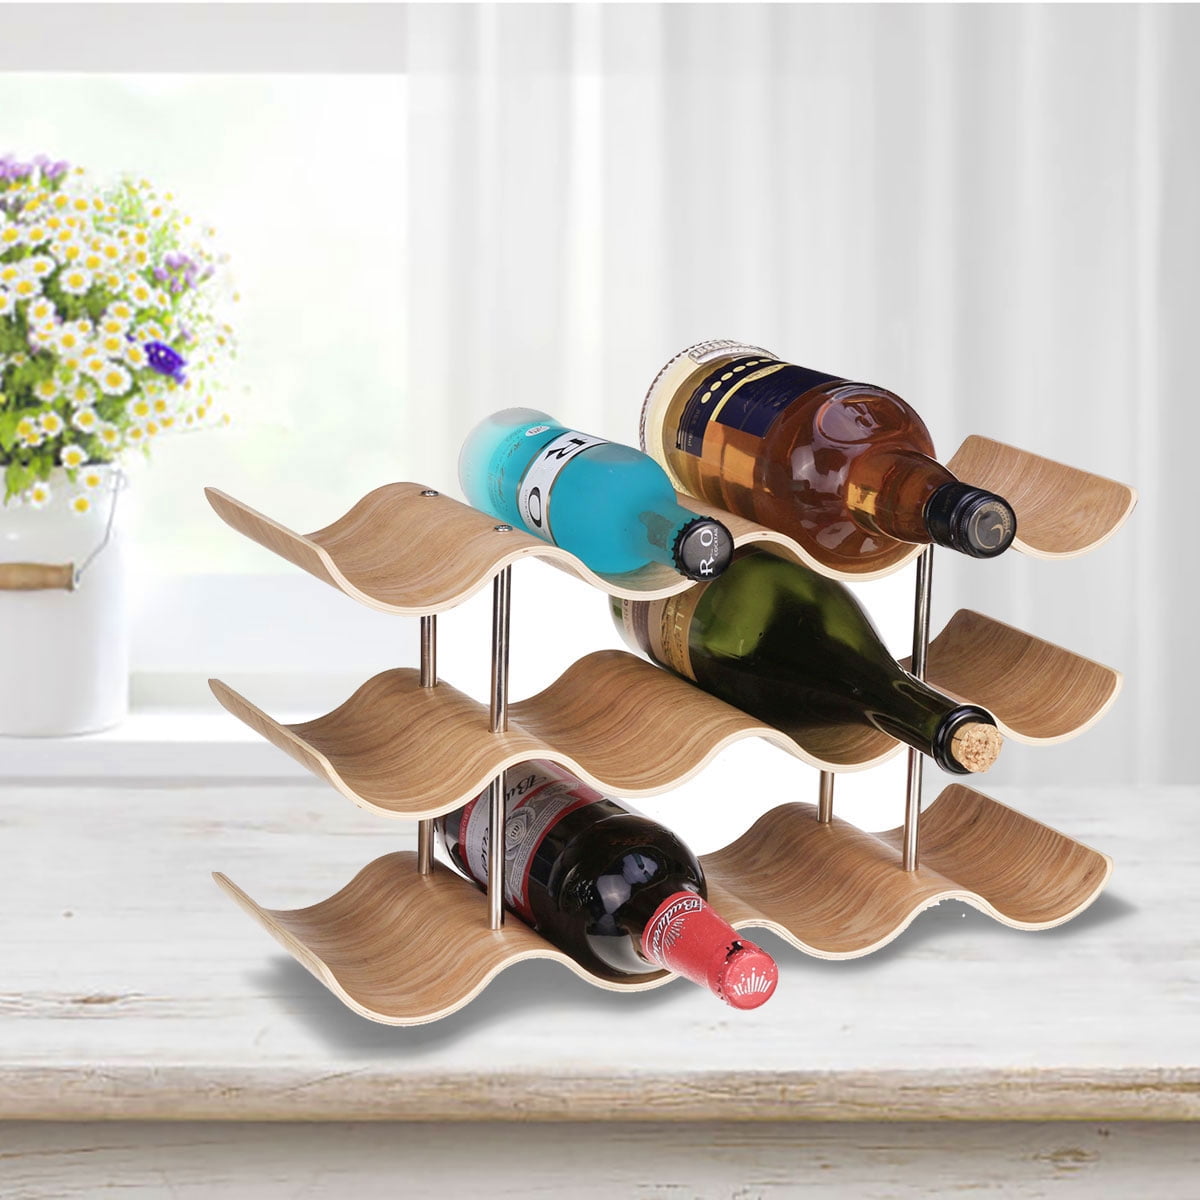 gerFogoo Wine Rack Beauty Girl Wine Bottle Holder Countertop Whisky Holder Shelf Sculpture Wine Stand Gift Crafts for Kitchen Home Room Decoration Red 